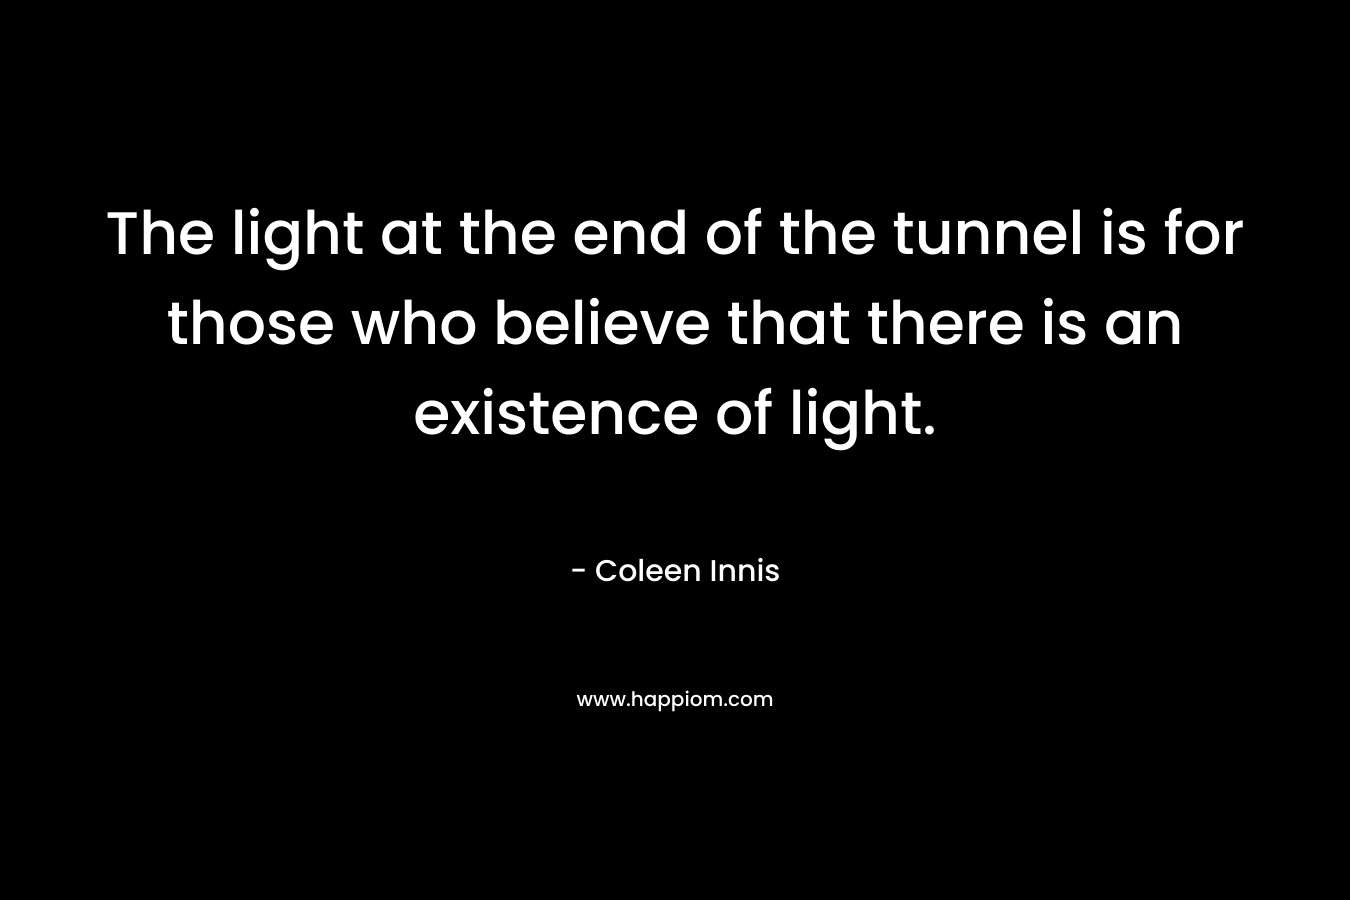 The light at the end of the tunnel is for those who believe that there is an existence of light.